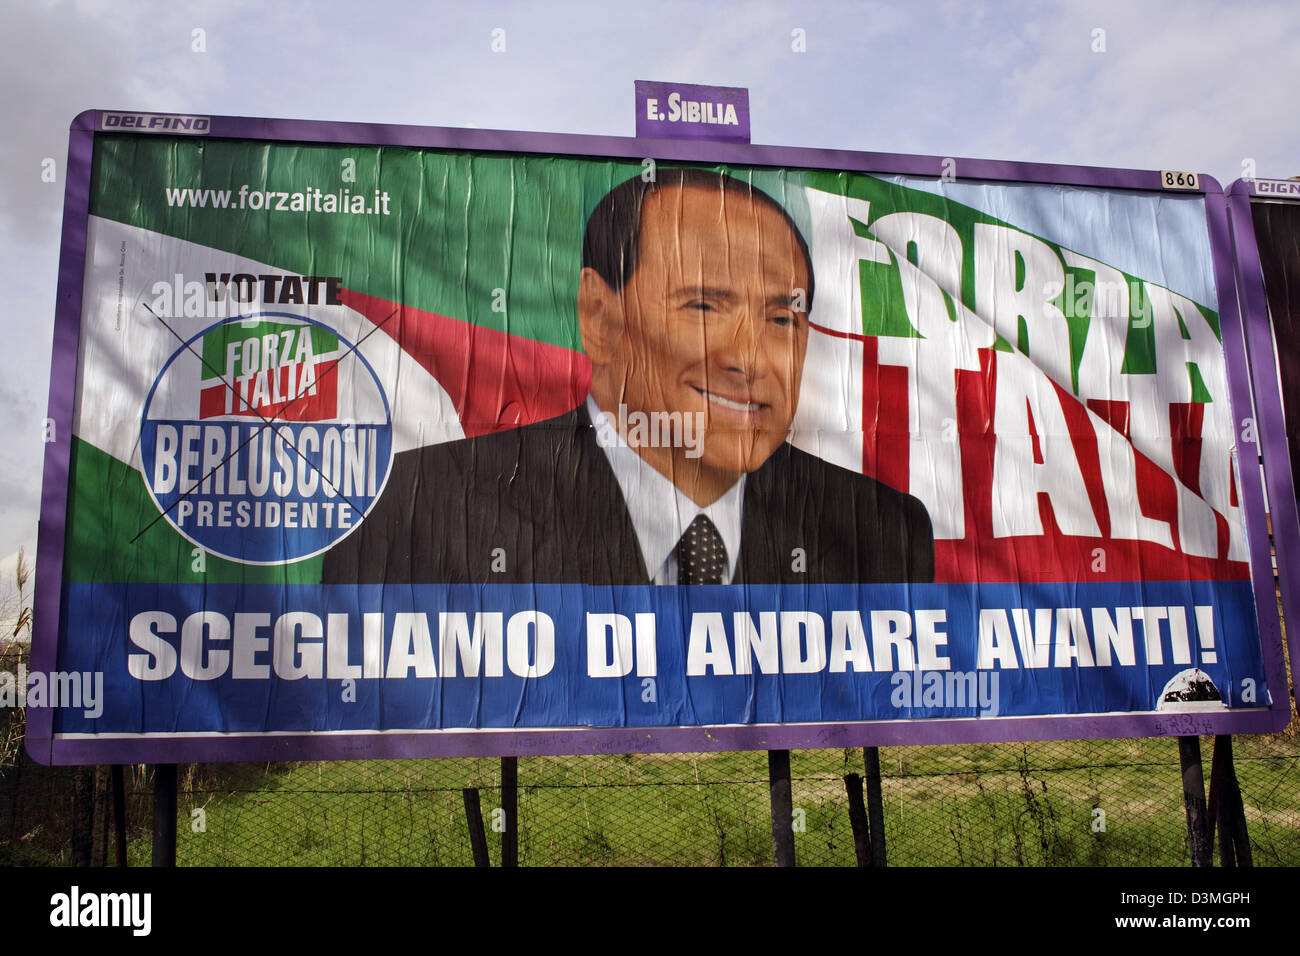 An election poster with Italian Force (Forza Italia) top candidate Silvio Berlusconi pictured in Rome, Italy, 25 February 2006. The slogan on the poster says 'We choose to move ahead!' (Scegliamo di andare avanti!). Italy will hold parliamentary elections on 9 April 2006. Photo: Lars Halbauer Stock Photo